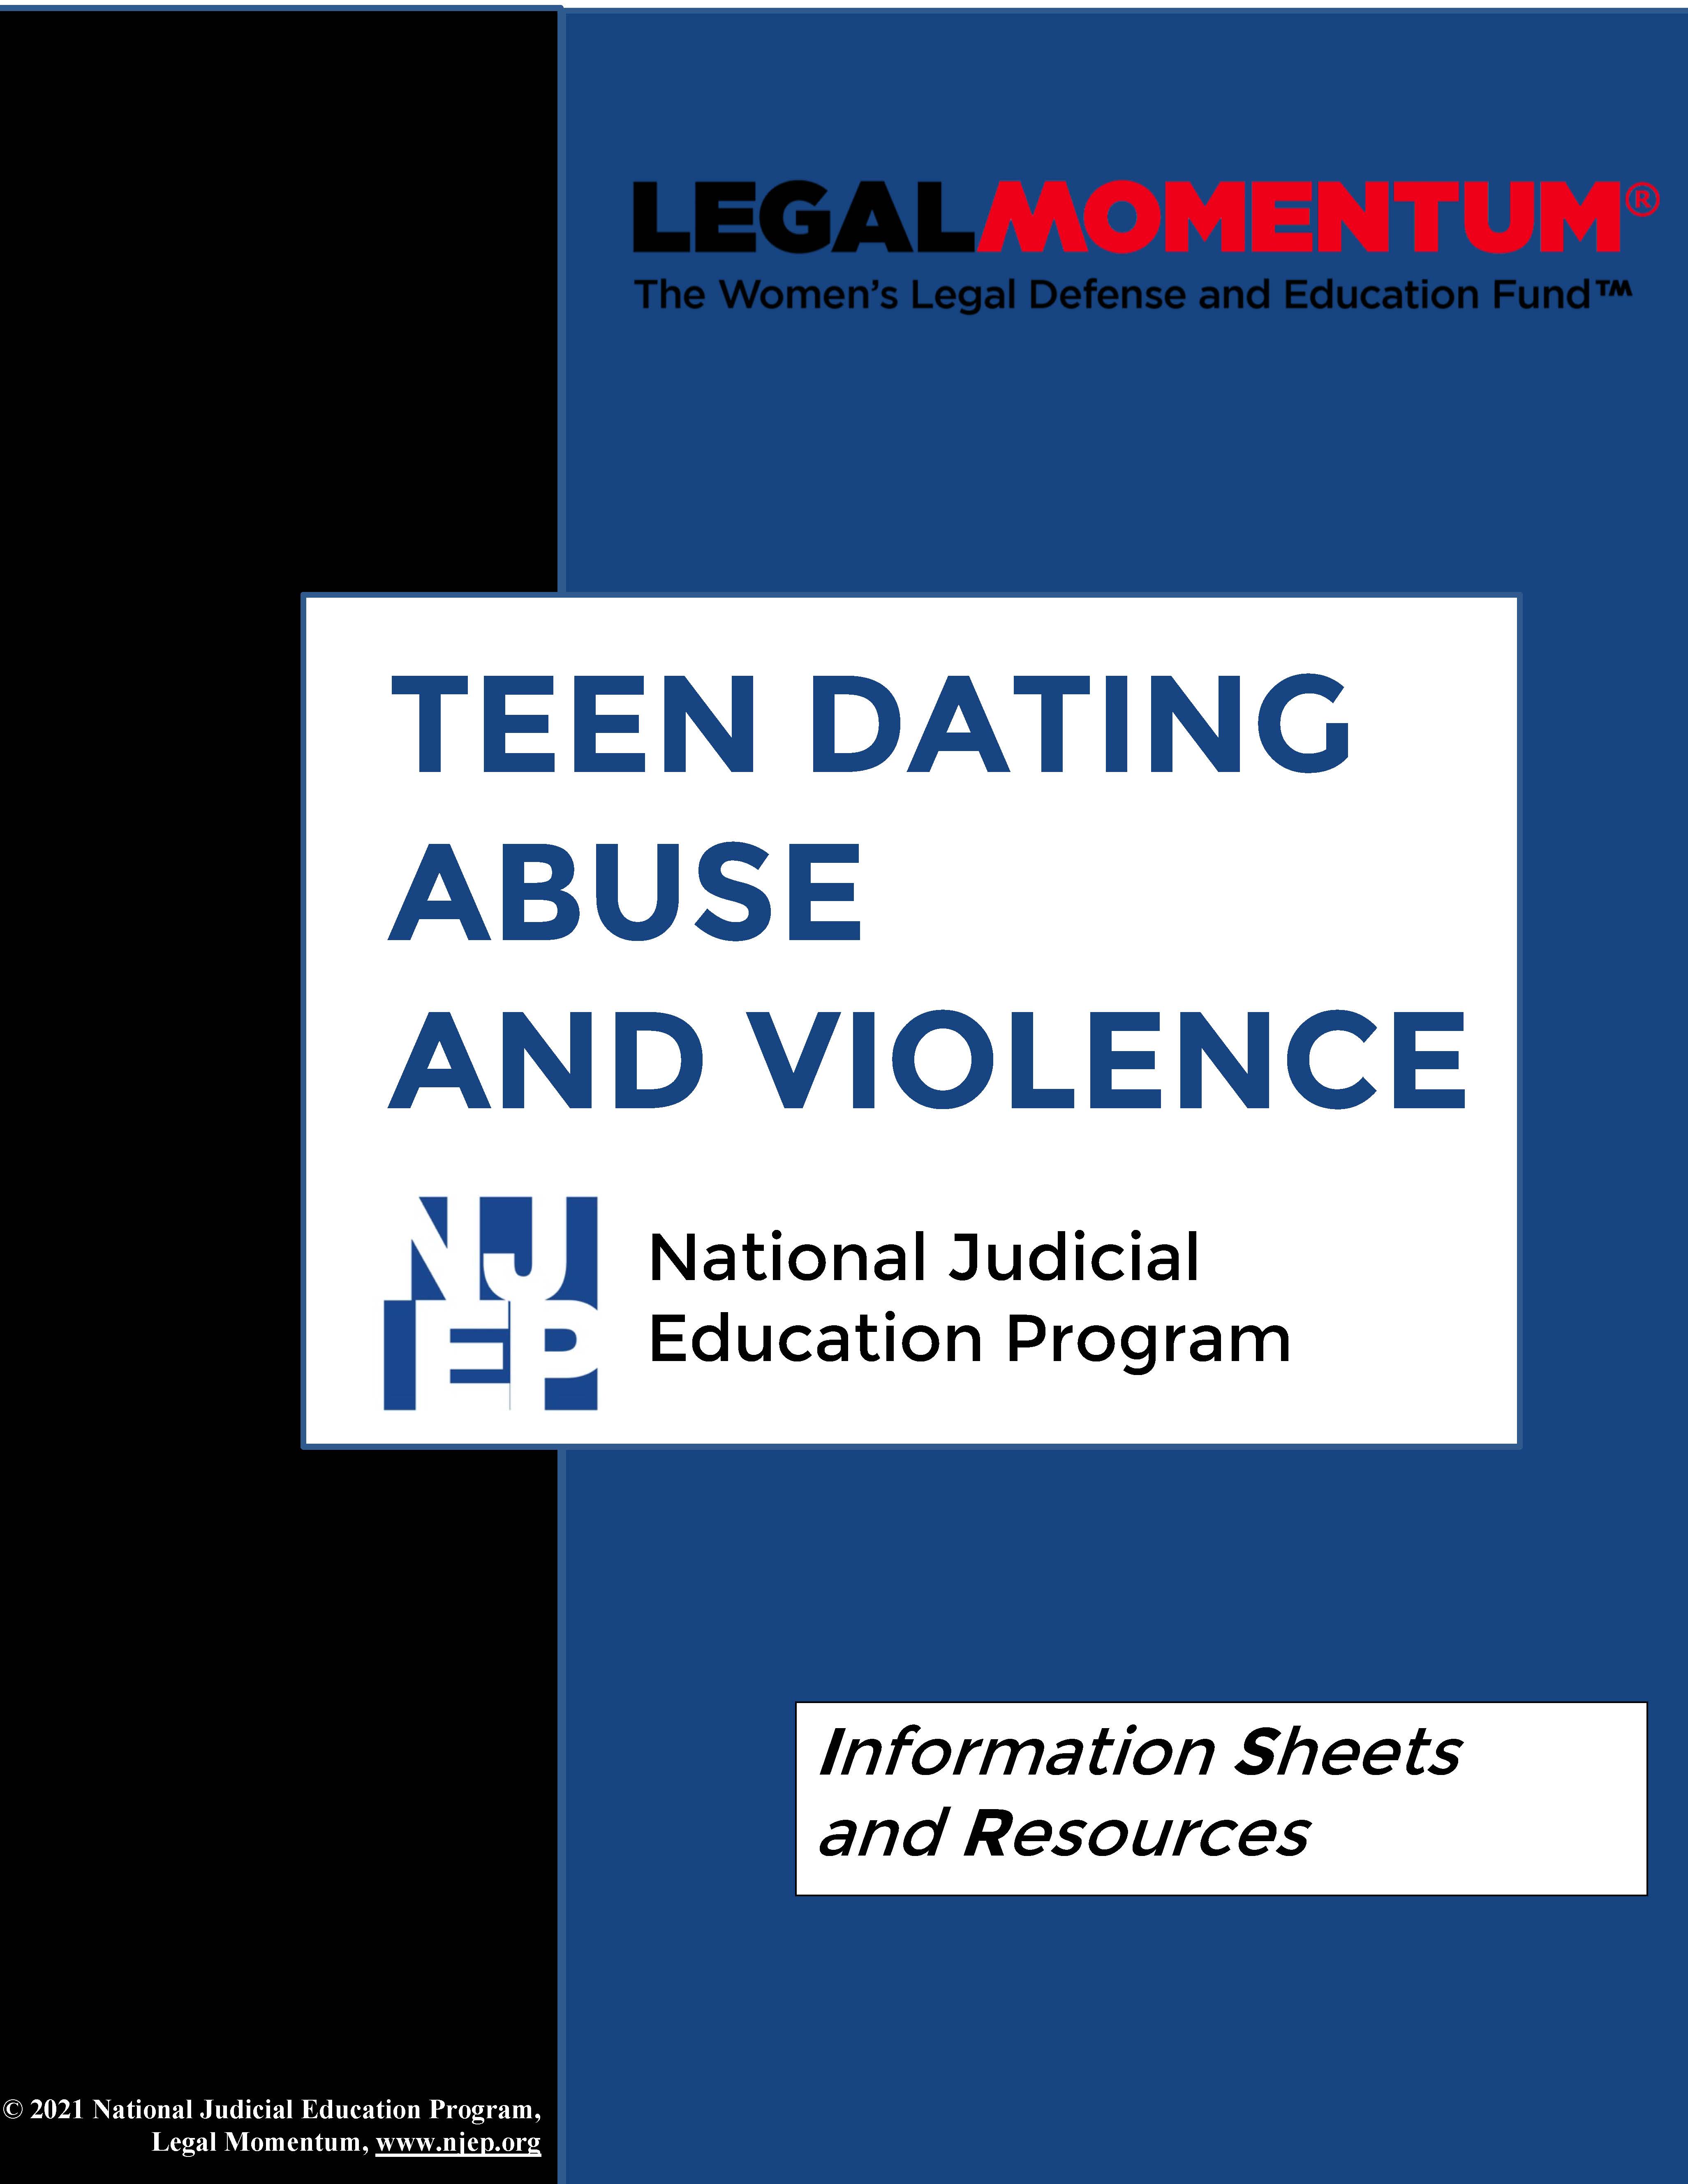 Teen Dating Abuse & Violence Information Sheets